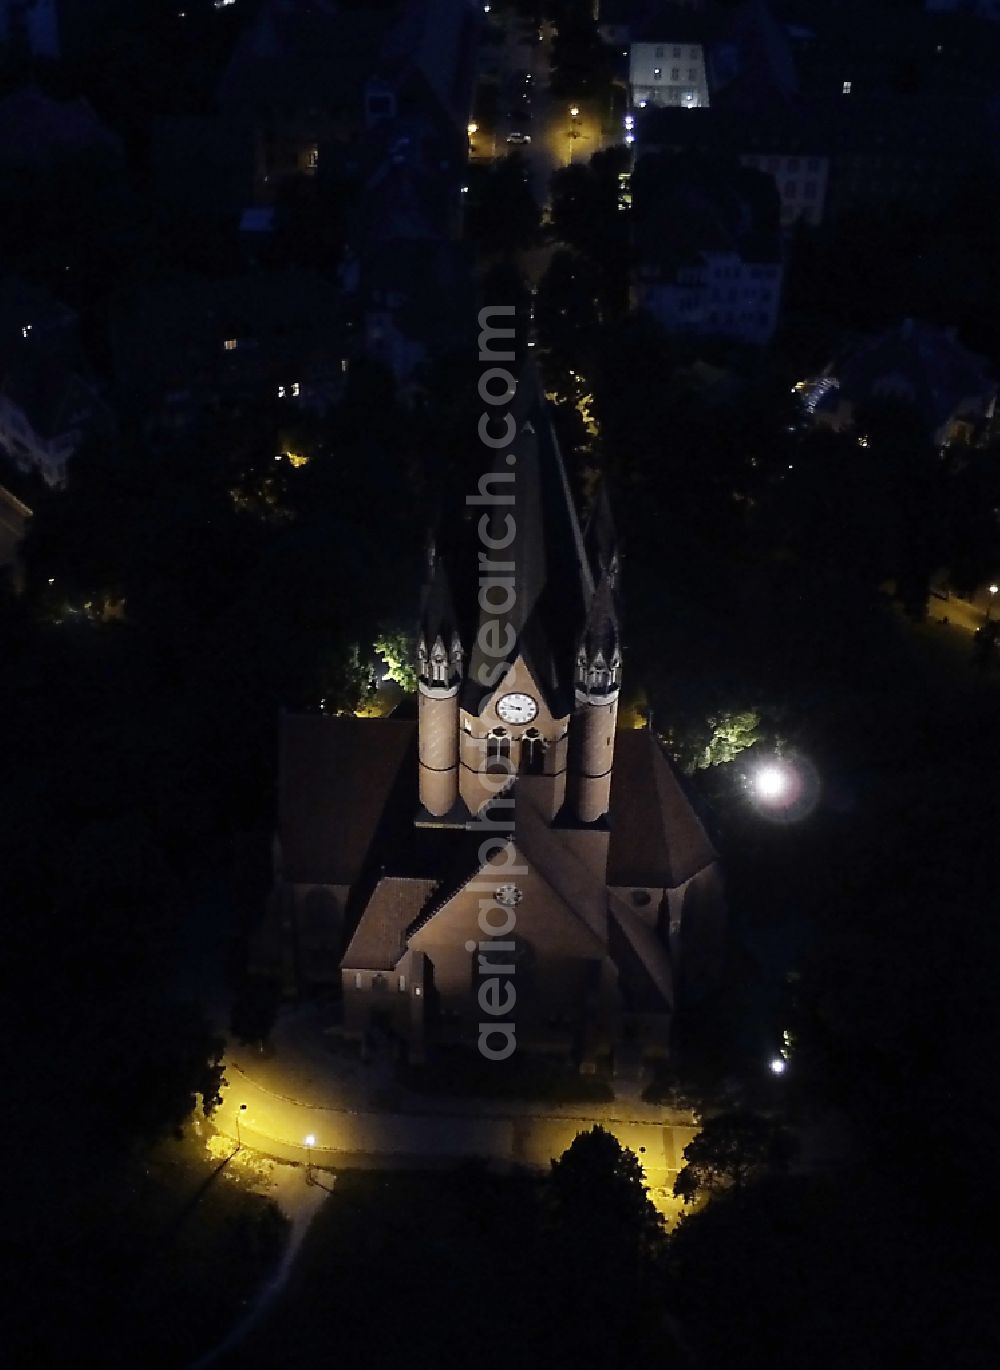 Aerial photograph at night Halle (Saale) - Night aerial view of the Church St. Paul's Church in St. Paul district of Halle (Saale) in Saxony-Anhalt